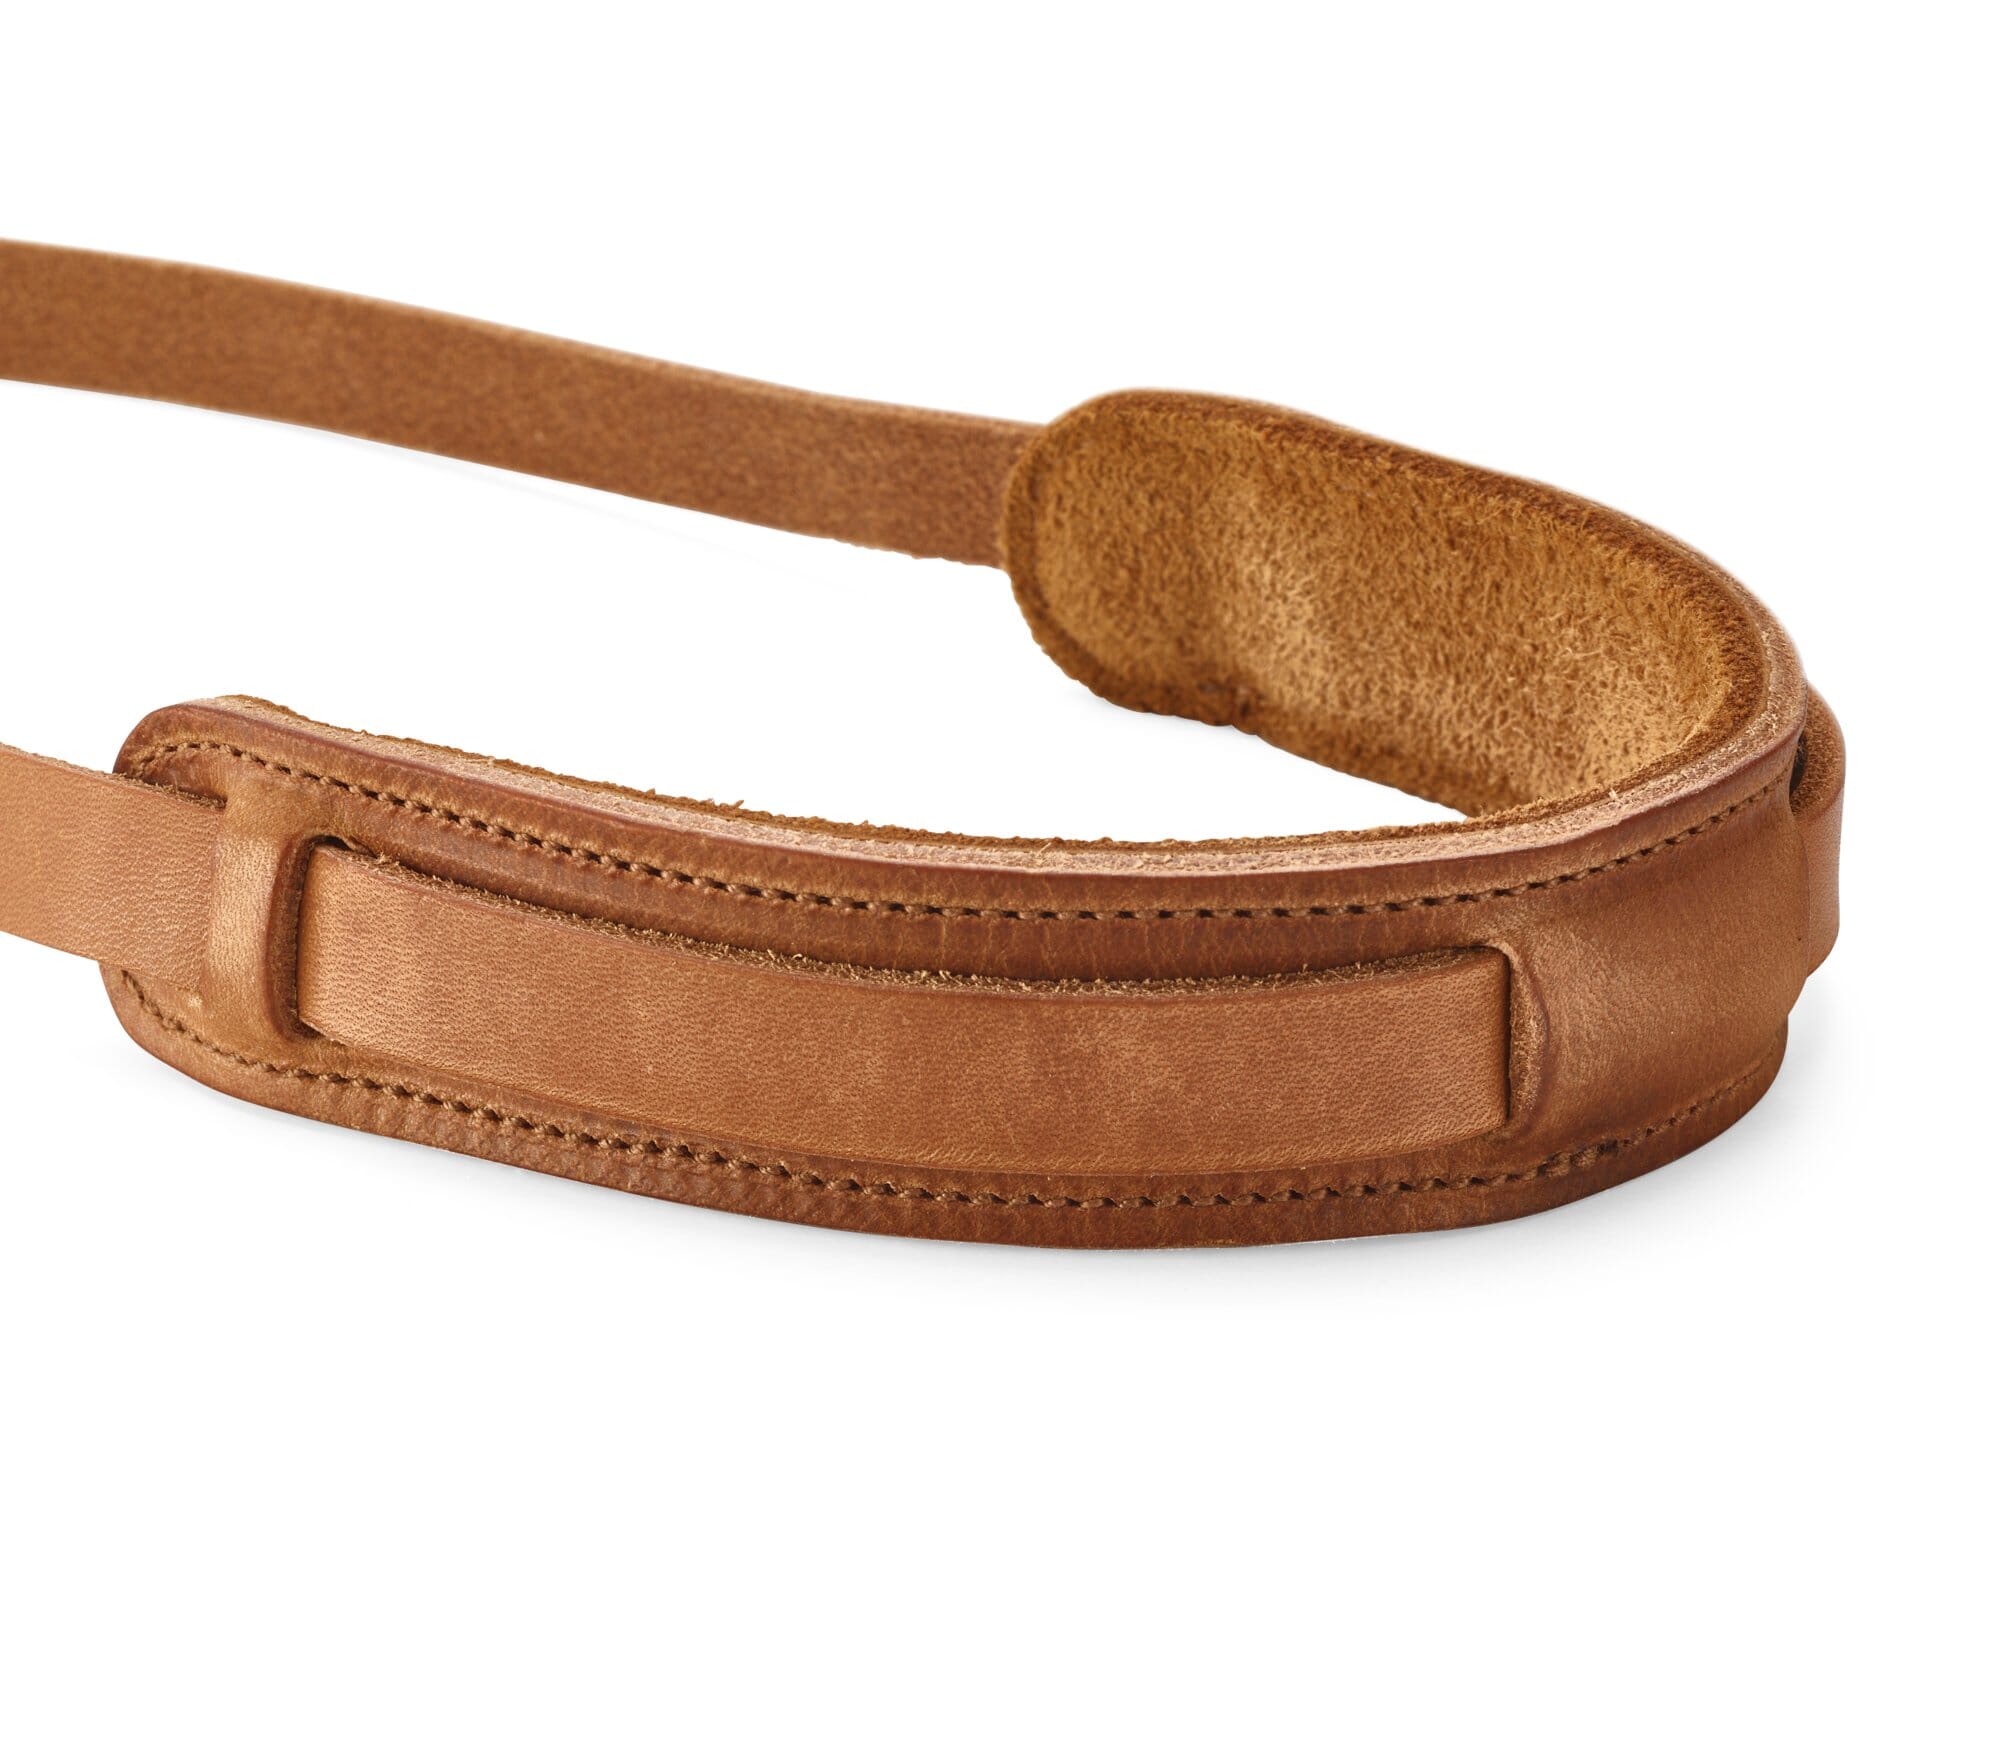 Camera Strap Made of Harness Leather, length 110 cm | Manufactum